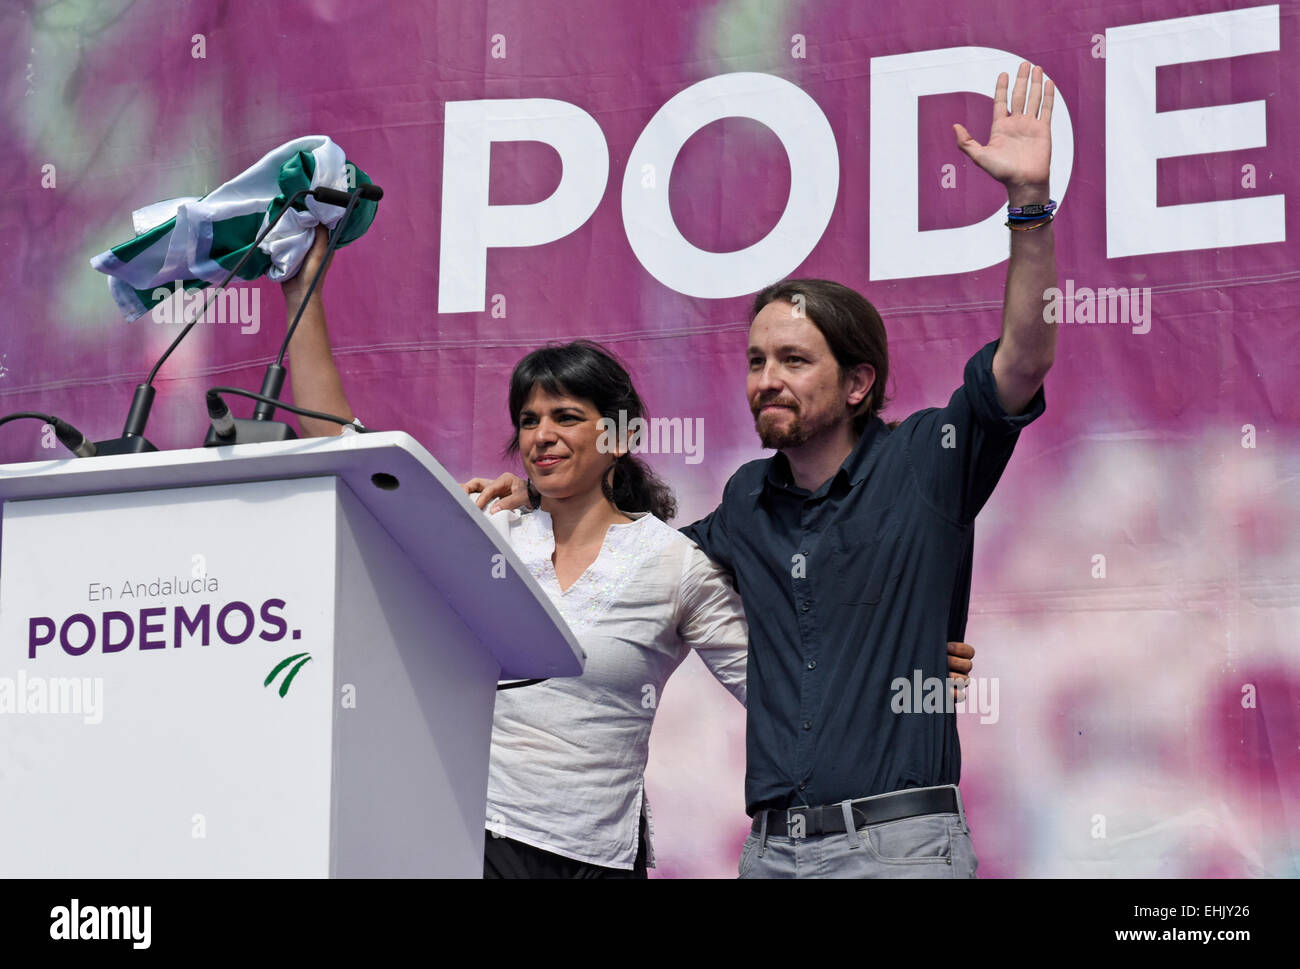 Pablo Iglesias leader and MEP of Spanish political party Podemos, supporting Teresa Rodriquez MEP and presidential candidate for the Junta de Andalucia at a rally in Plaza de La Merced, Malaga Spain  Staurday 14th of March 2015. Teresa is holding the green and white flag of Andalucia Andalusia Stock Photo